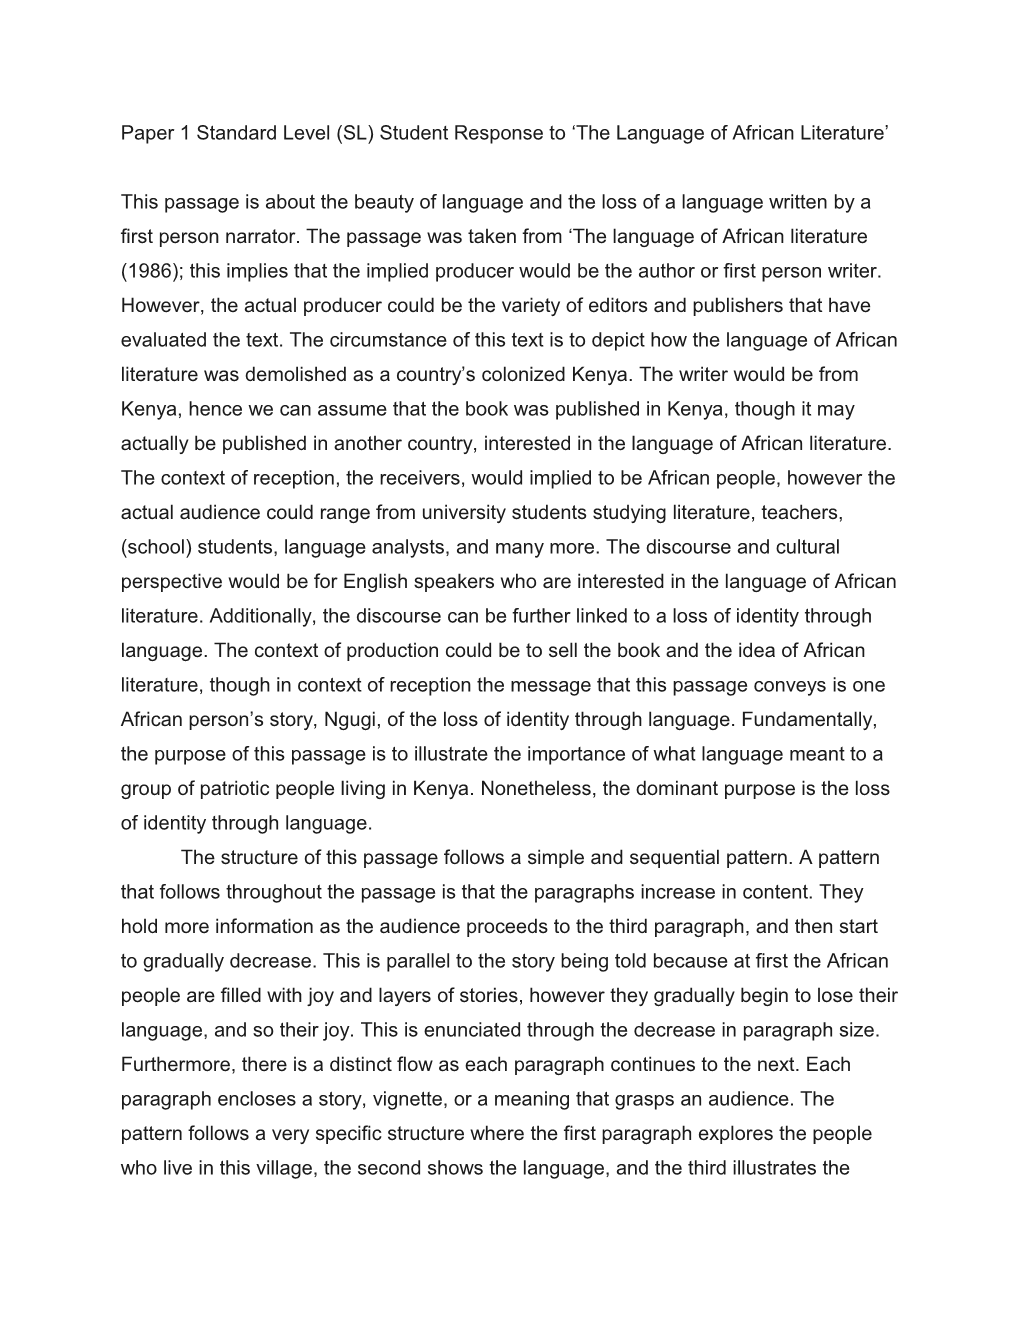 Paper 1 Standard Level (SL) Student Response to the Language of African Literature